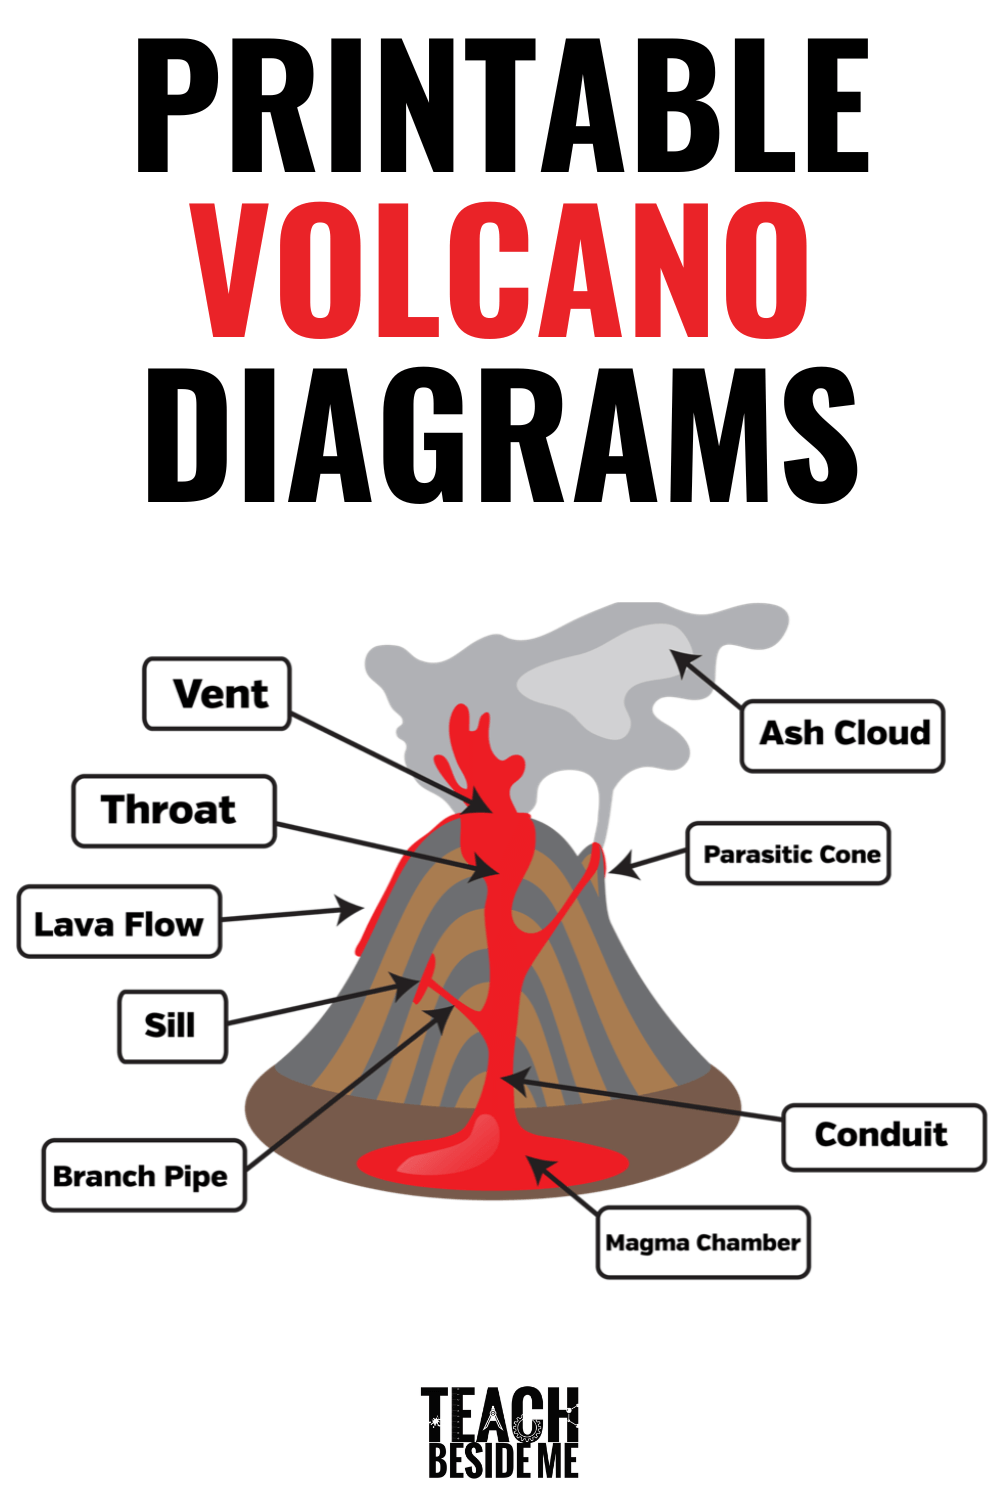 hypothesis on volcano science project